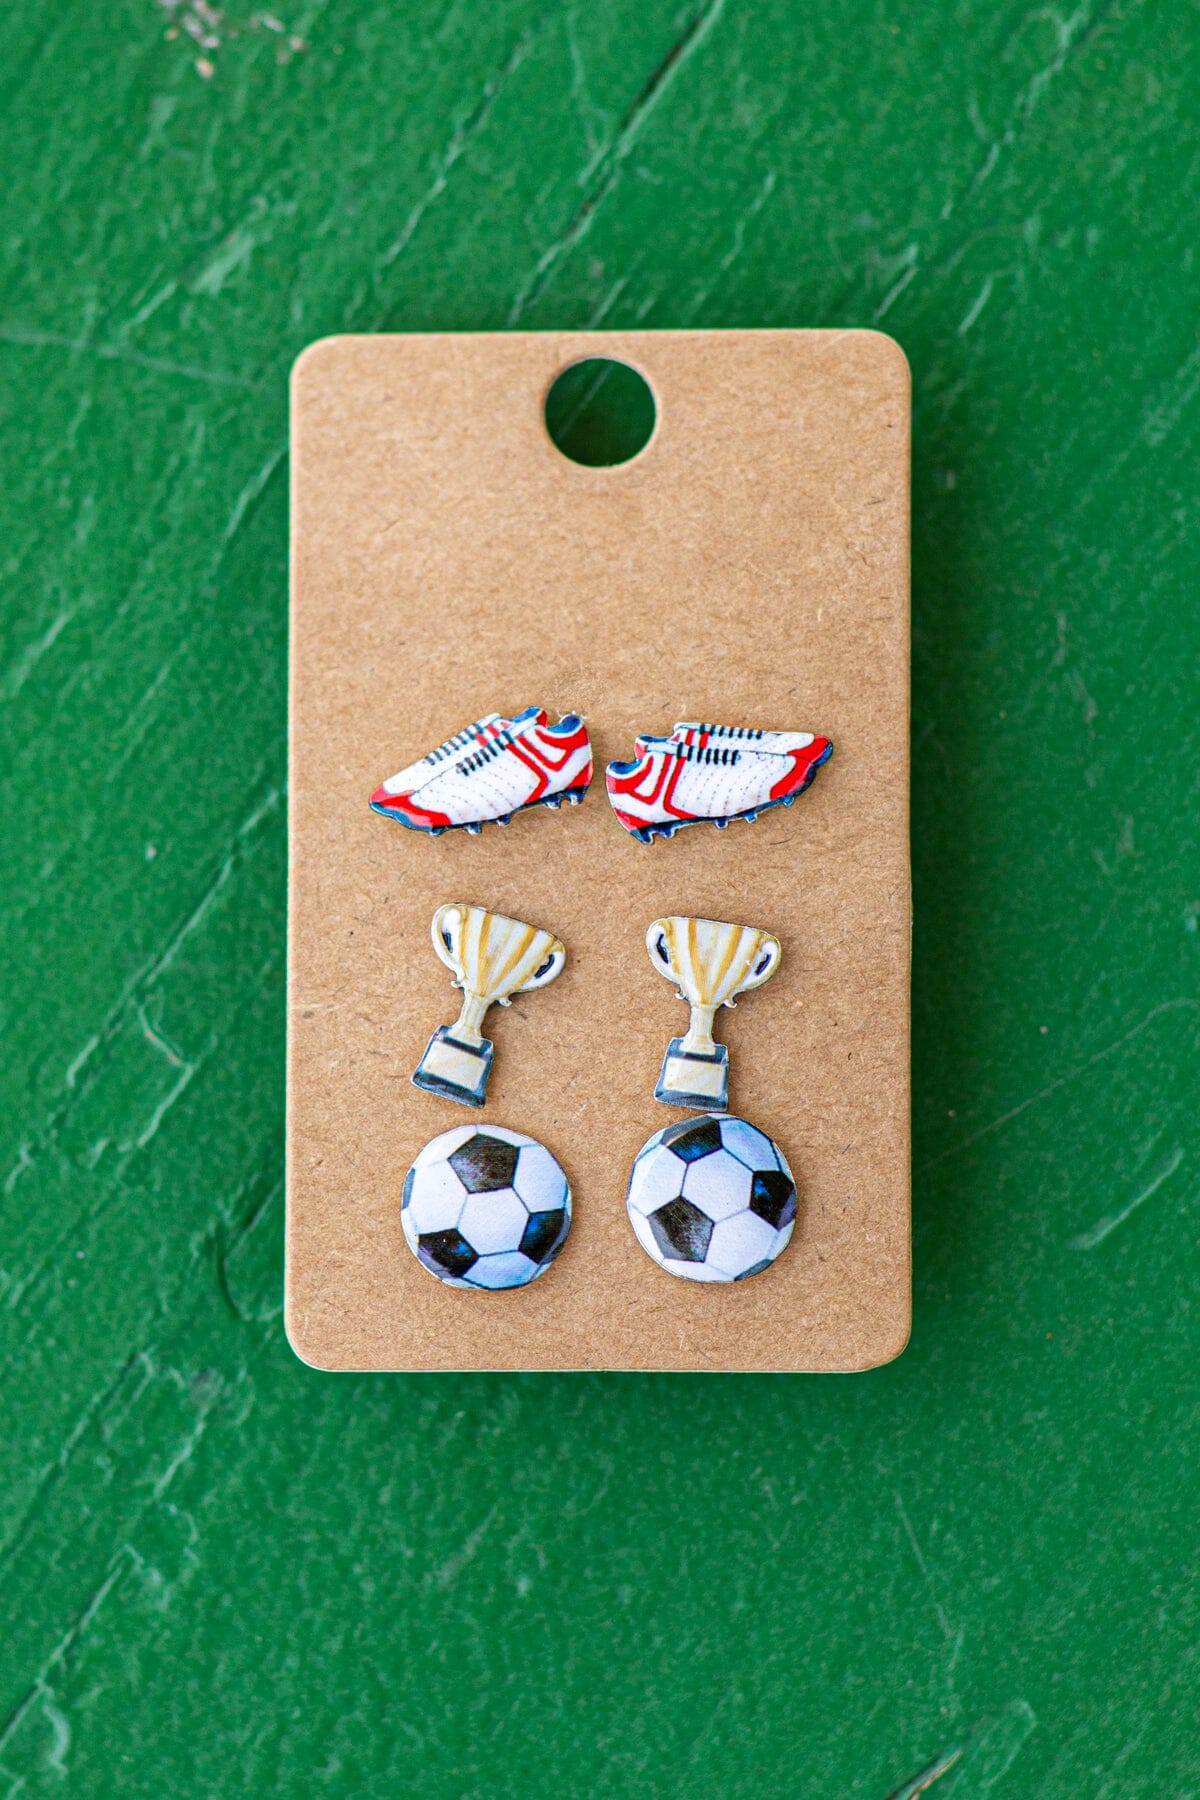 Black and White Soccer Stud Earring Set - Filly Flair